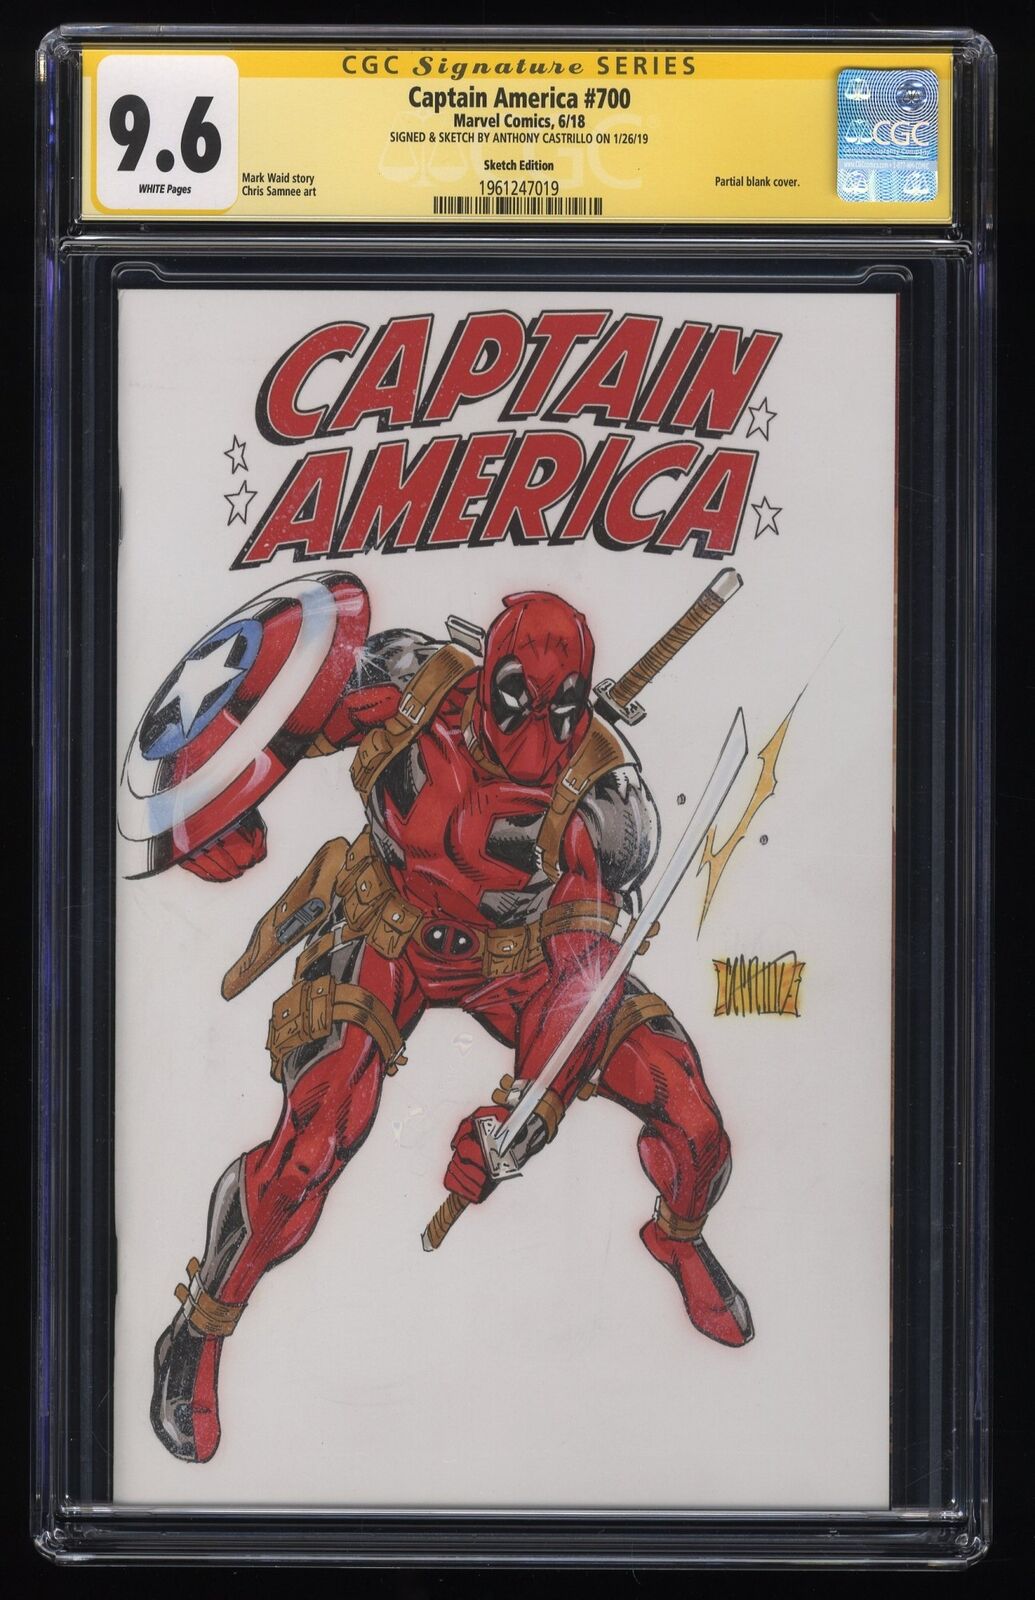 Captain America #700 CGC NM+ 9.6 Signed SS Anthony Castrillo Sketch Edition